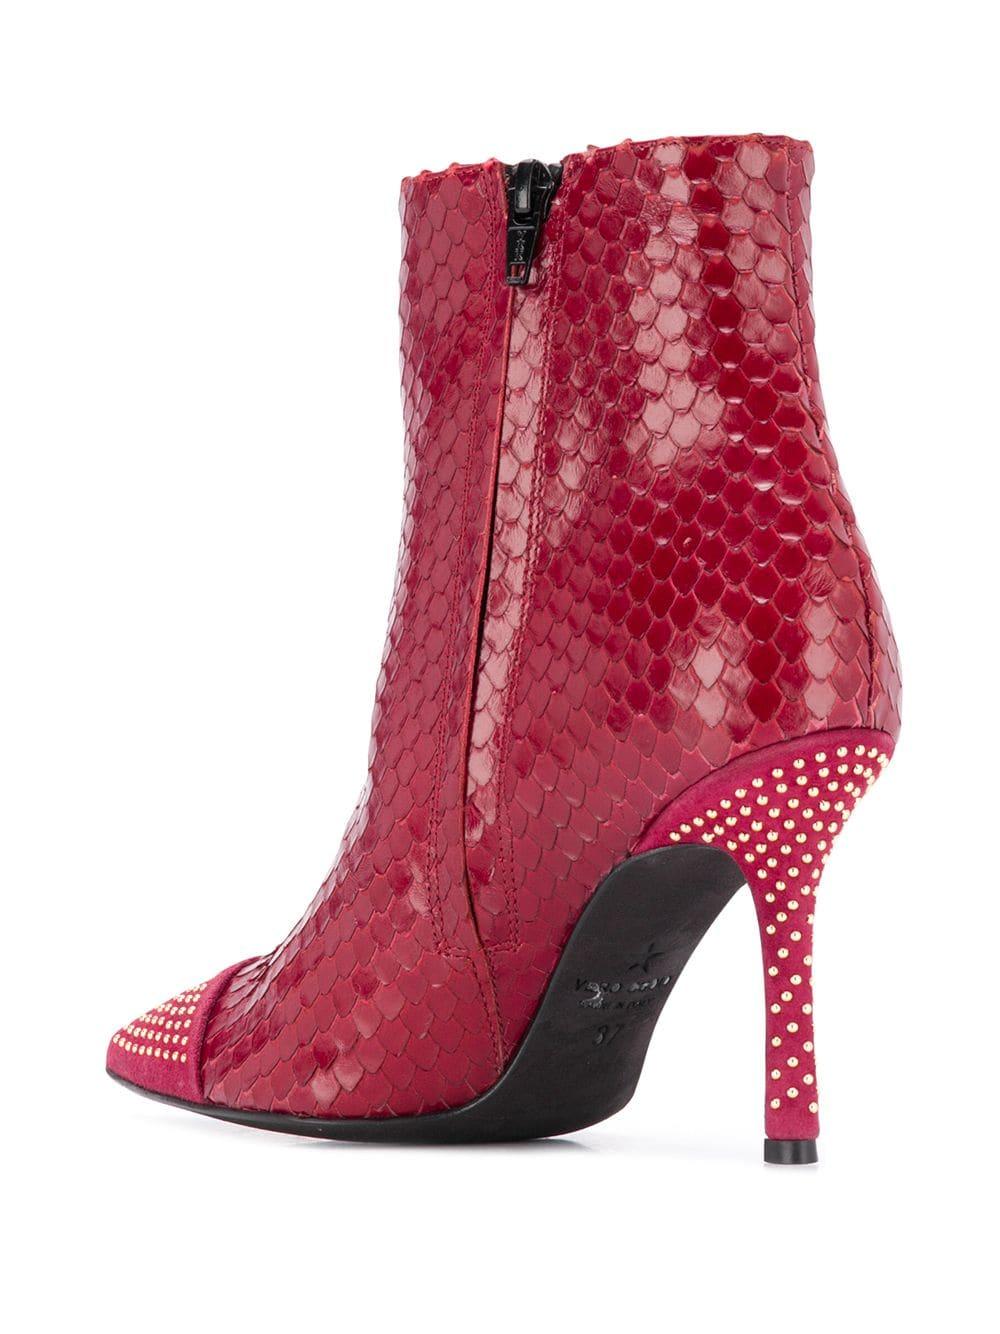 Marc Ellis Leather Snakeskin Effect Ankle Boots in Red - Lyst